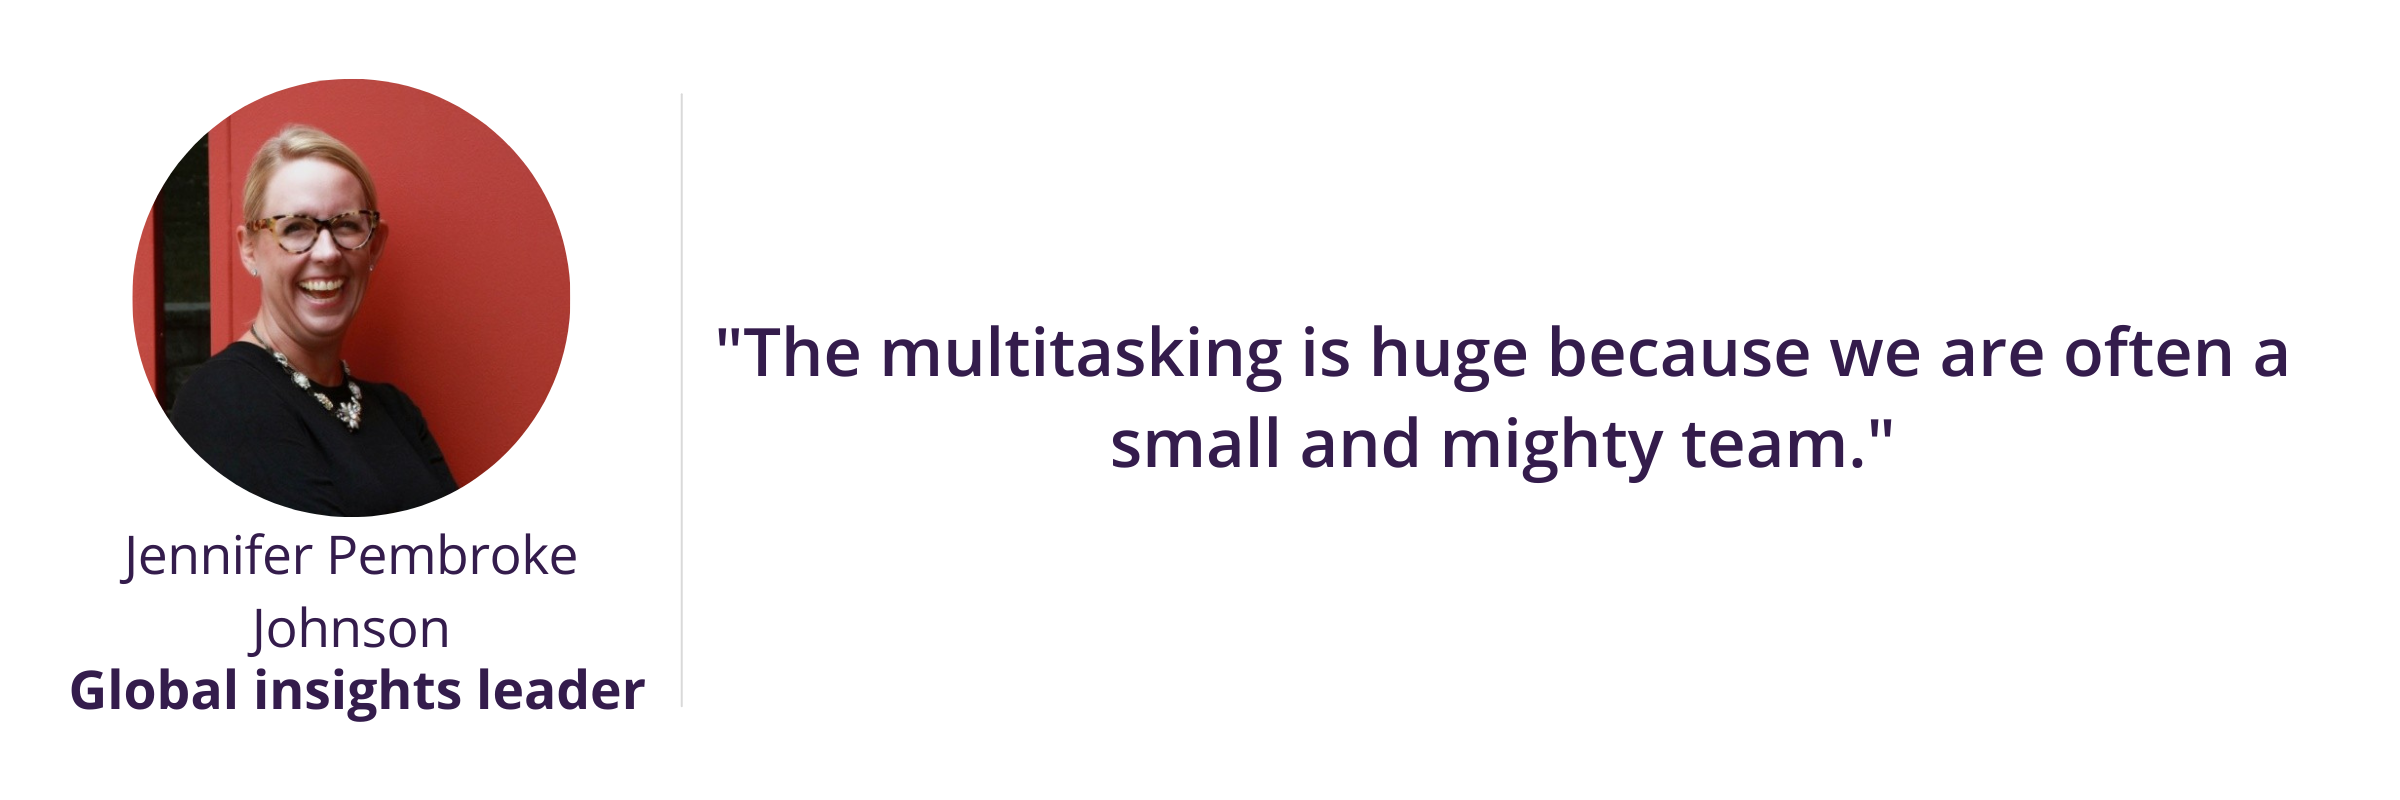 "The multitasking is huge because we are often a small and mighty team."